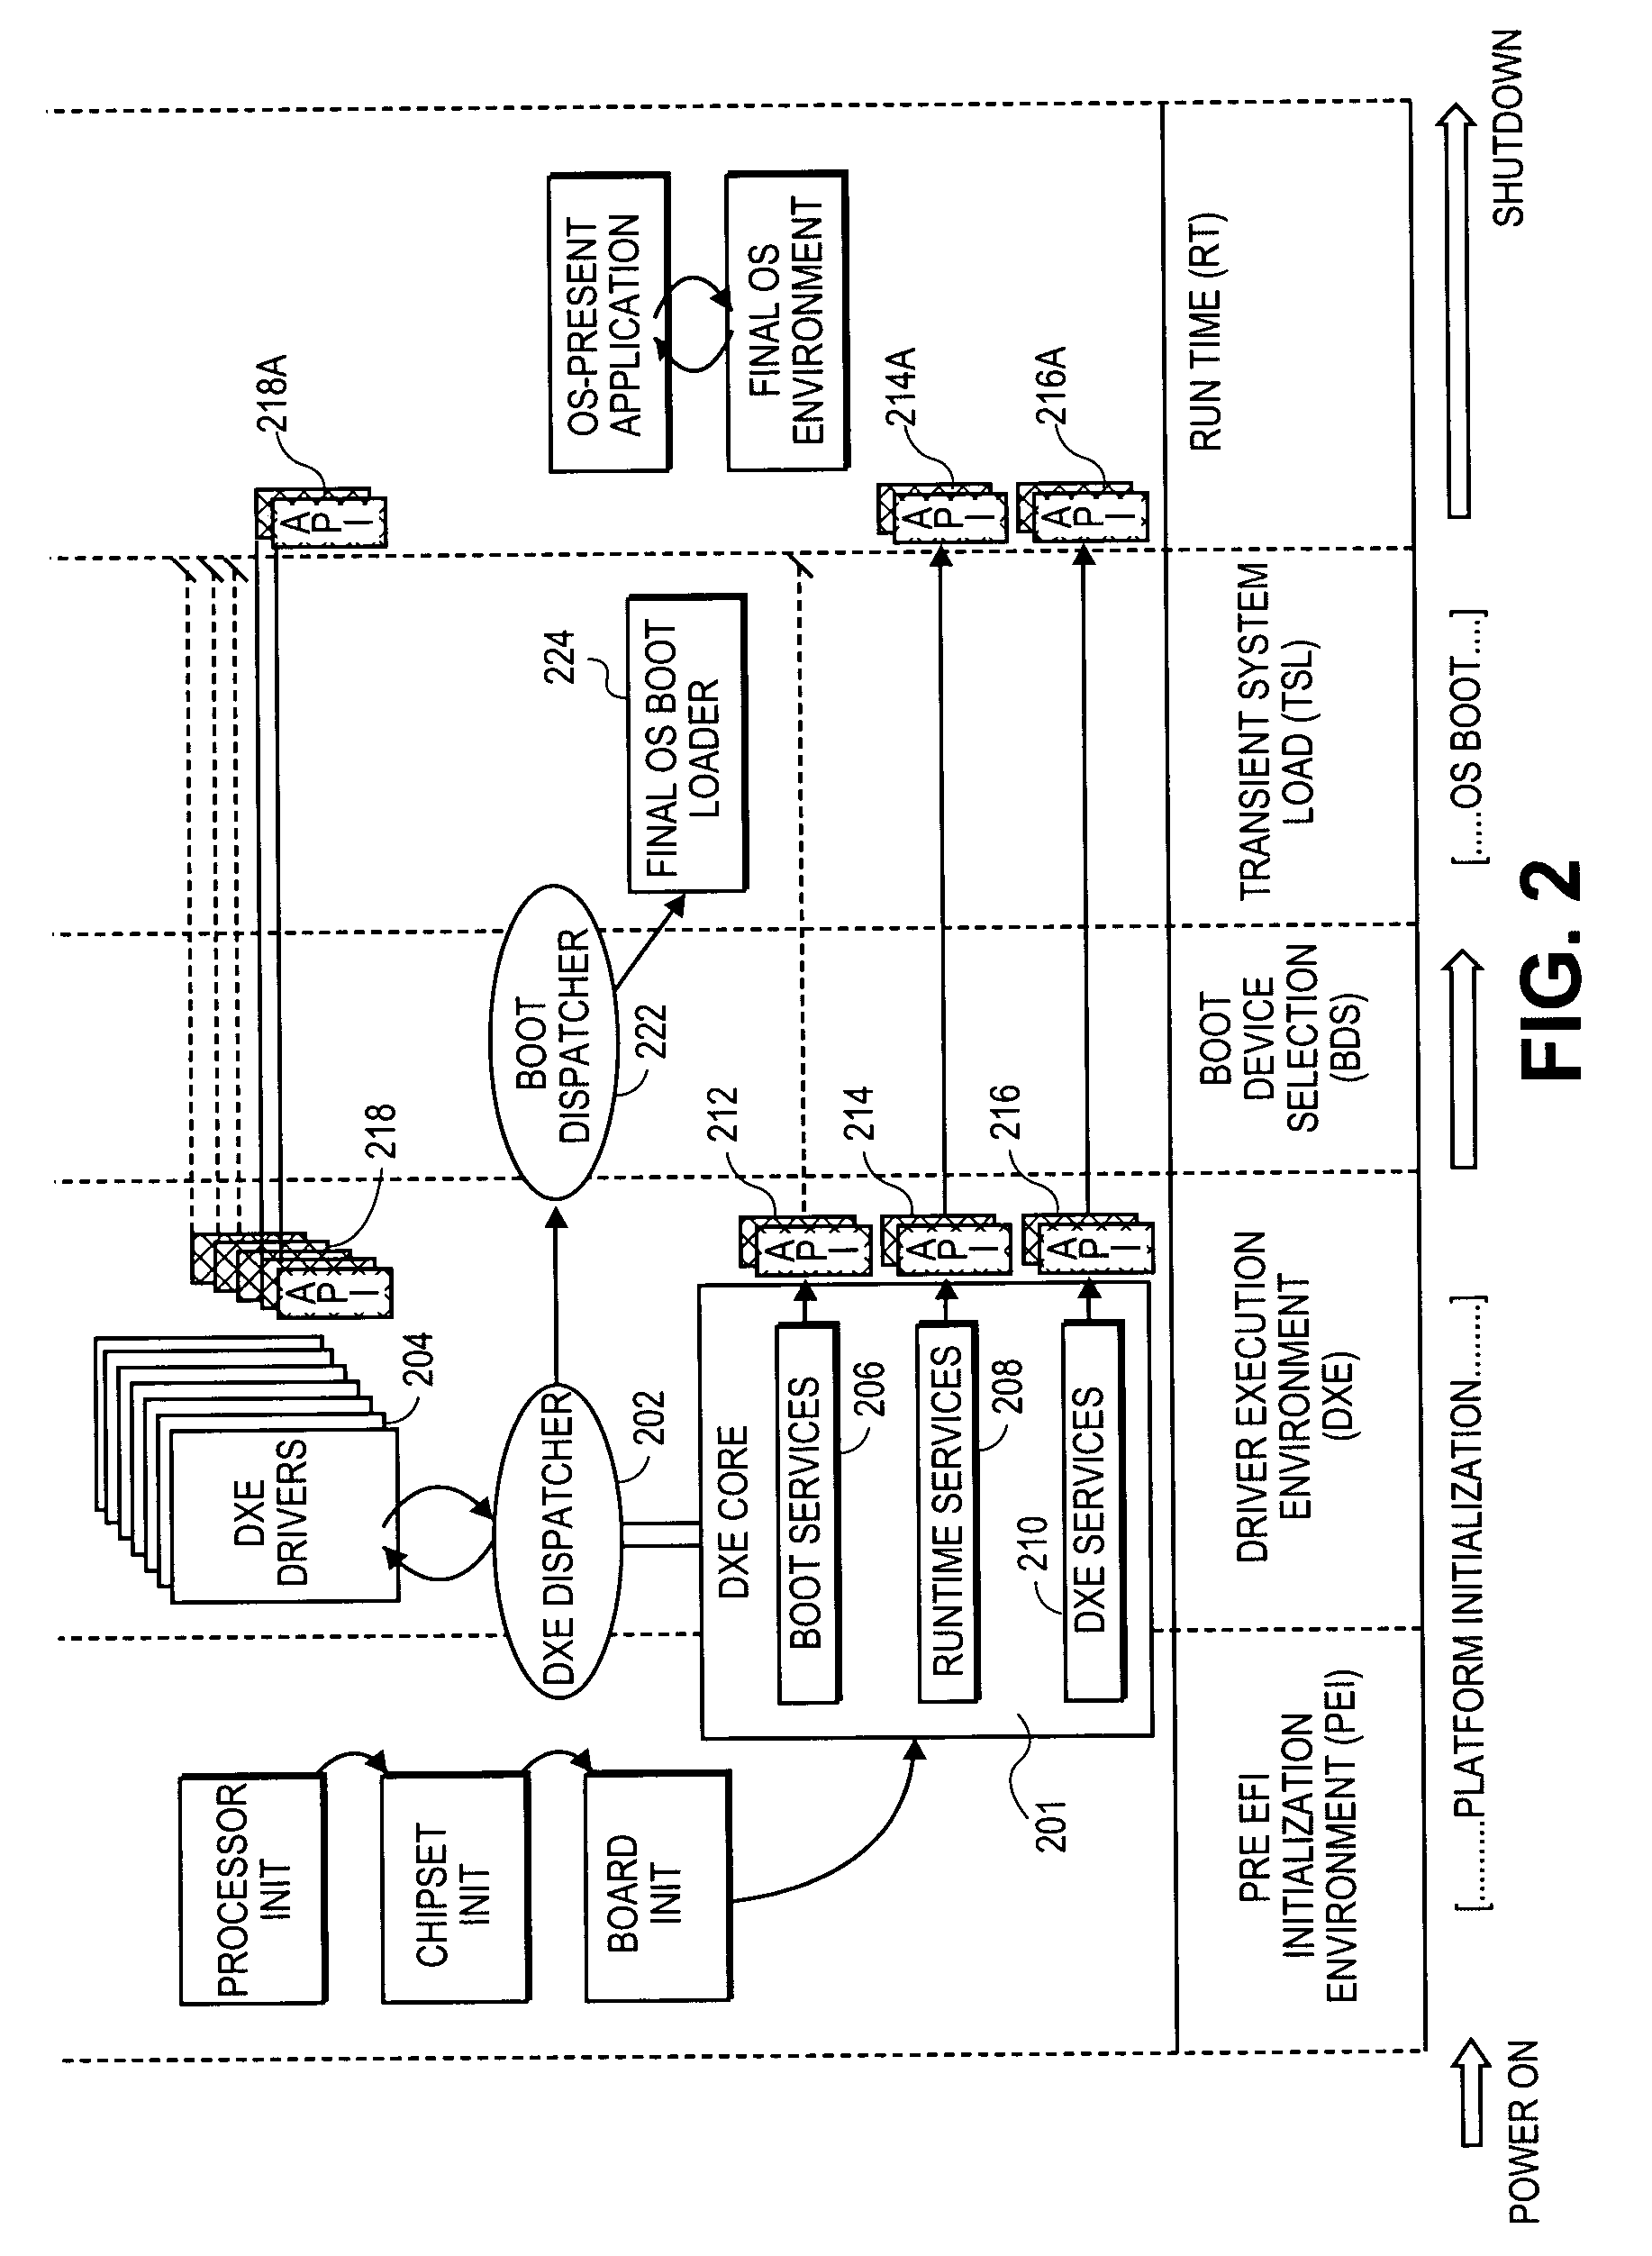 Method of activating management mode through a network for monitoring a hardware entity and transmitting the monitored information through the network